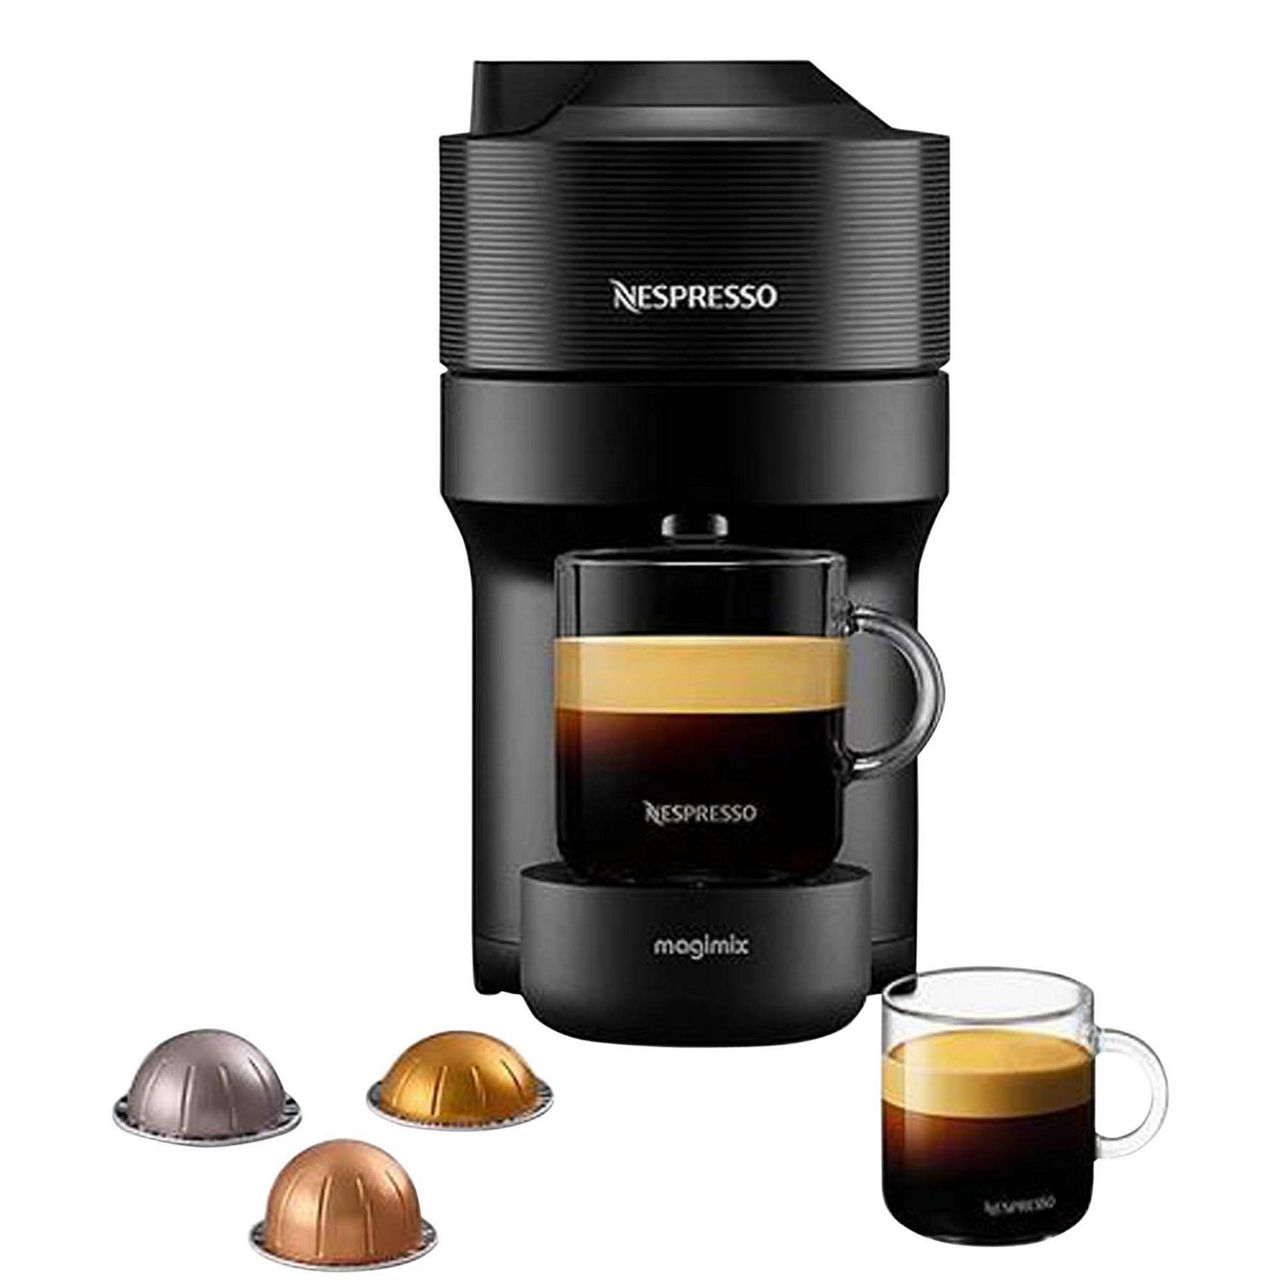 Brown Thomas - Nespresso has just revealed its newly